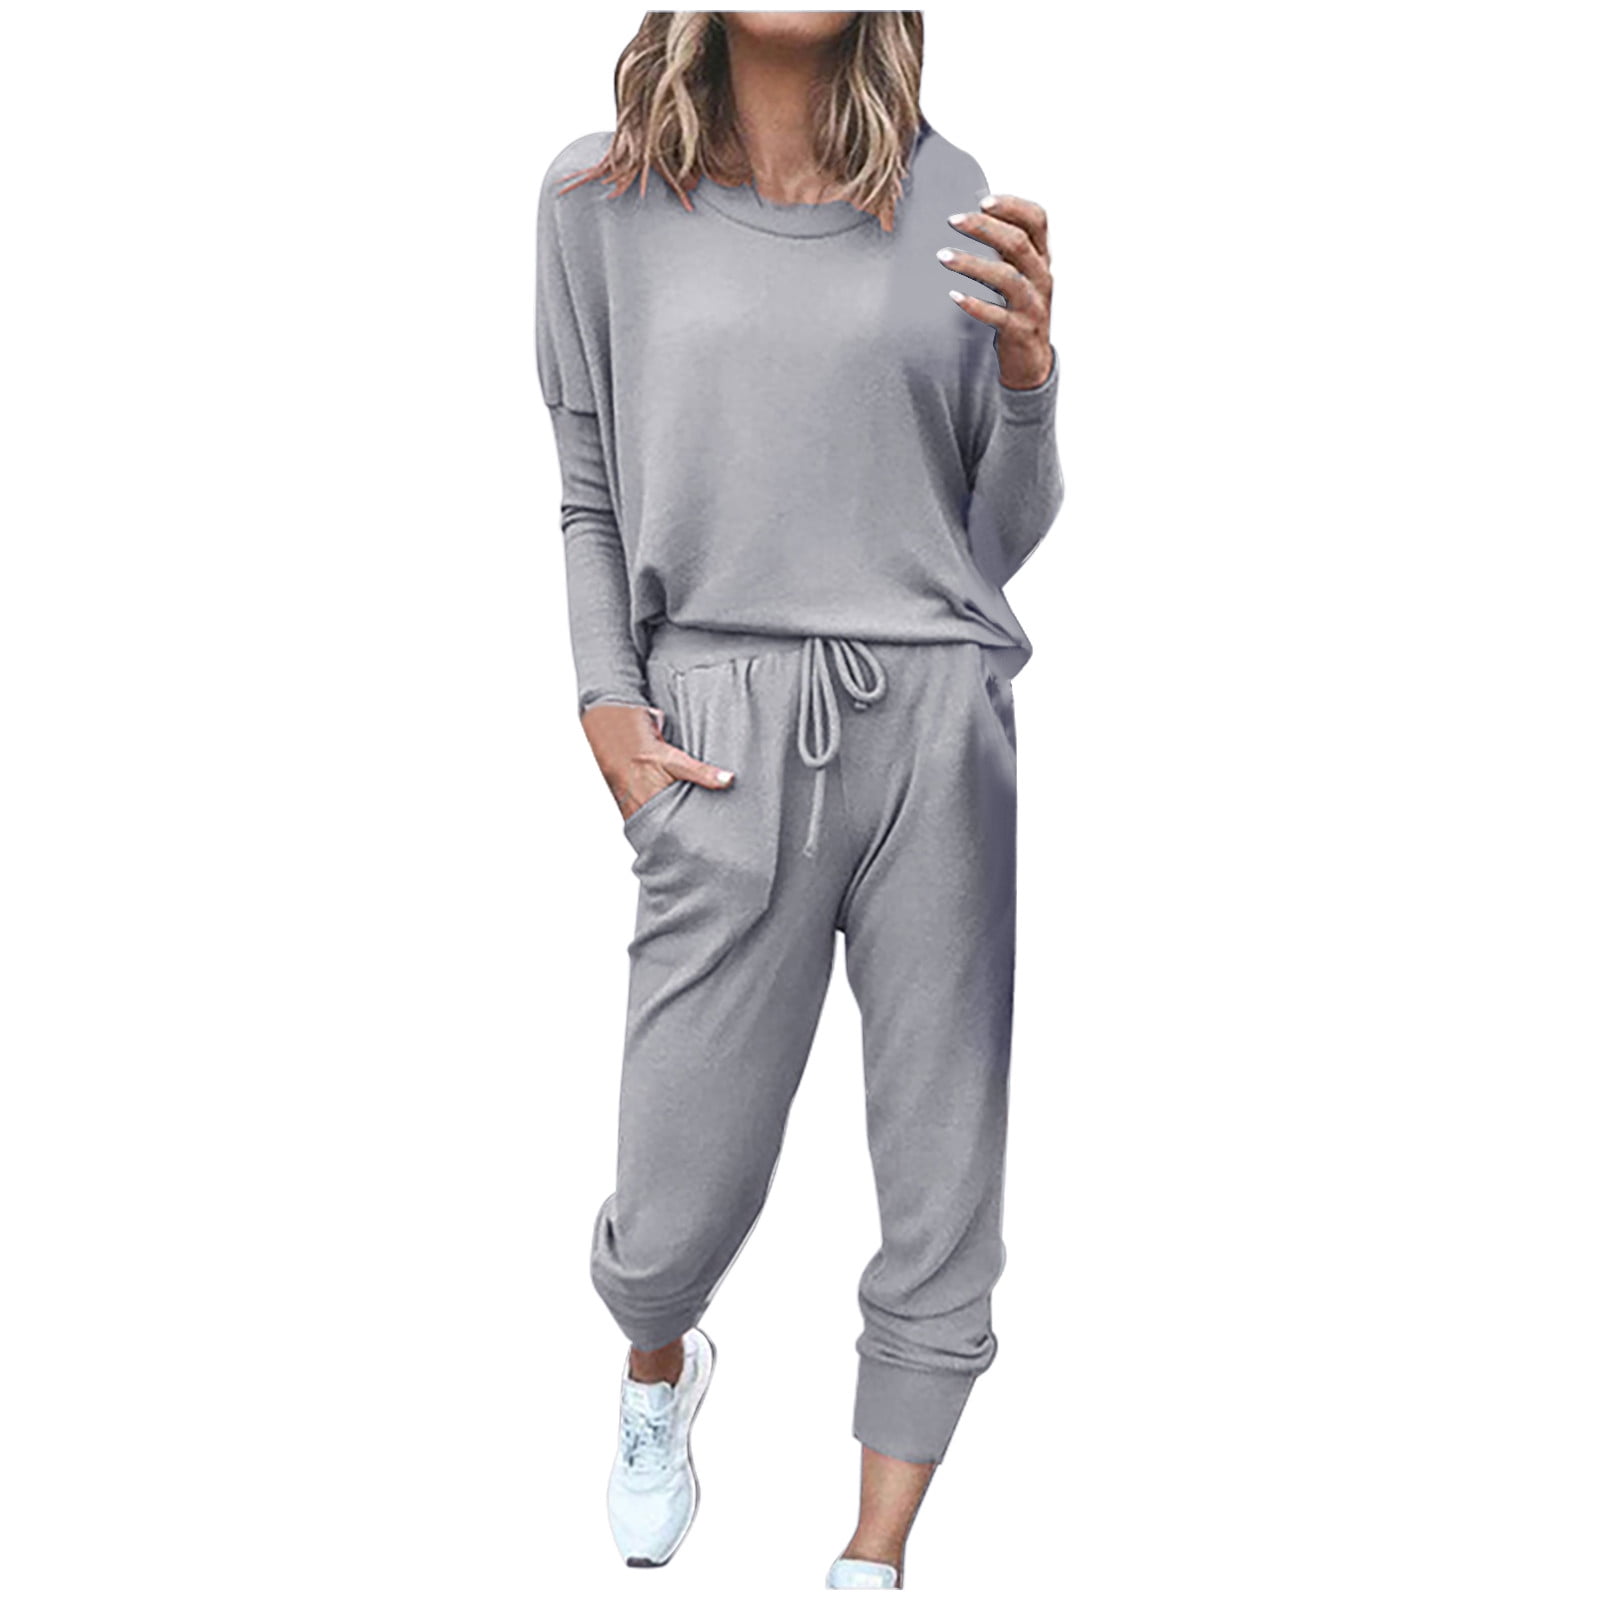 JGGSPWM 2 Piece Sweatsuits for Women Casual Active Wear Outfit Jogger ...